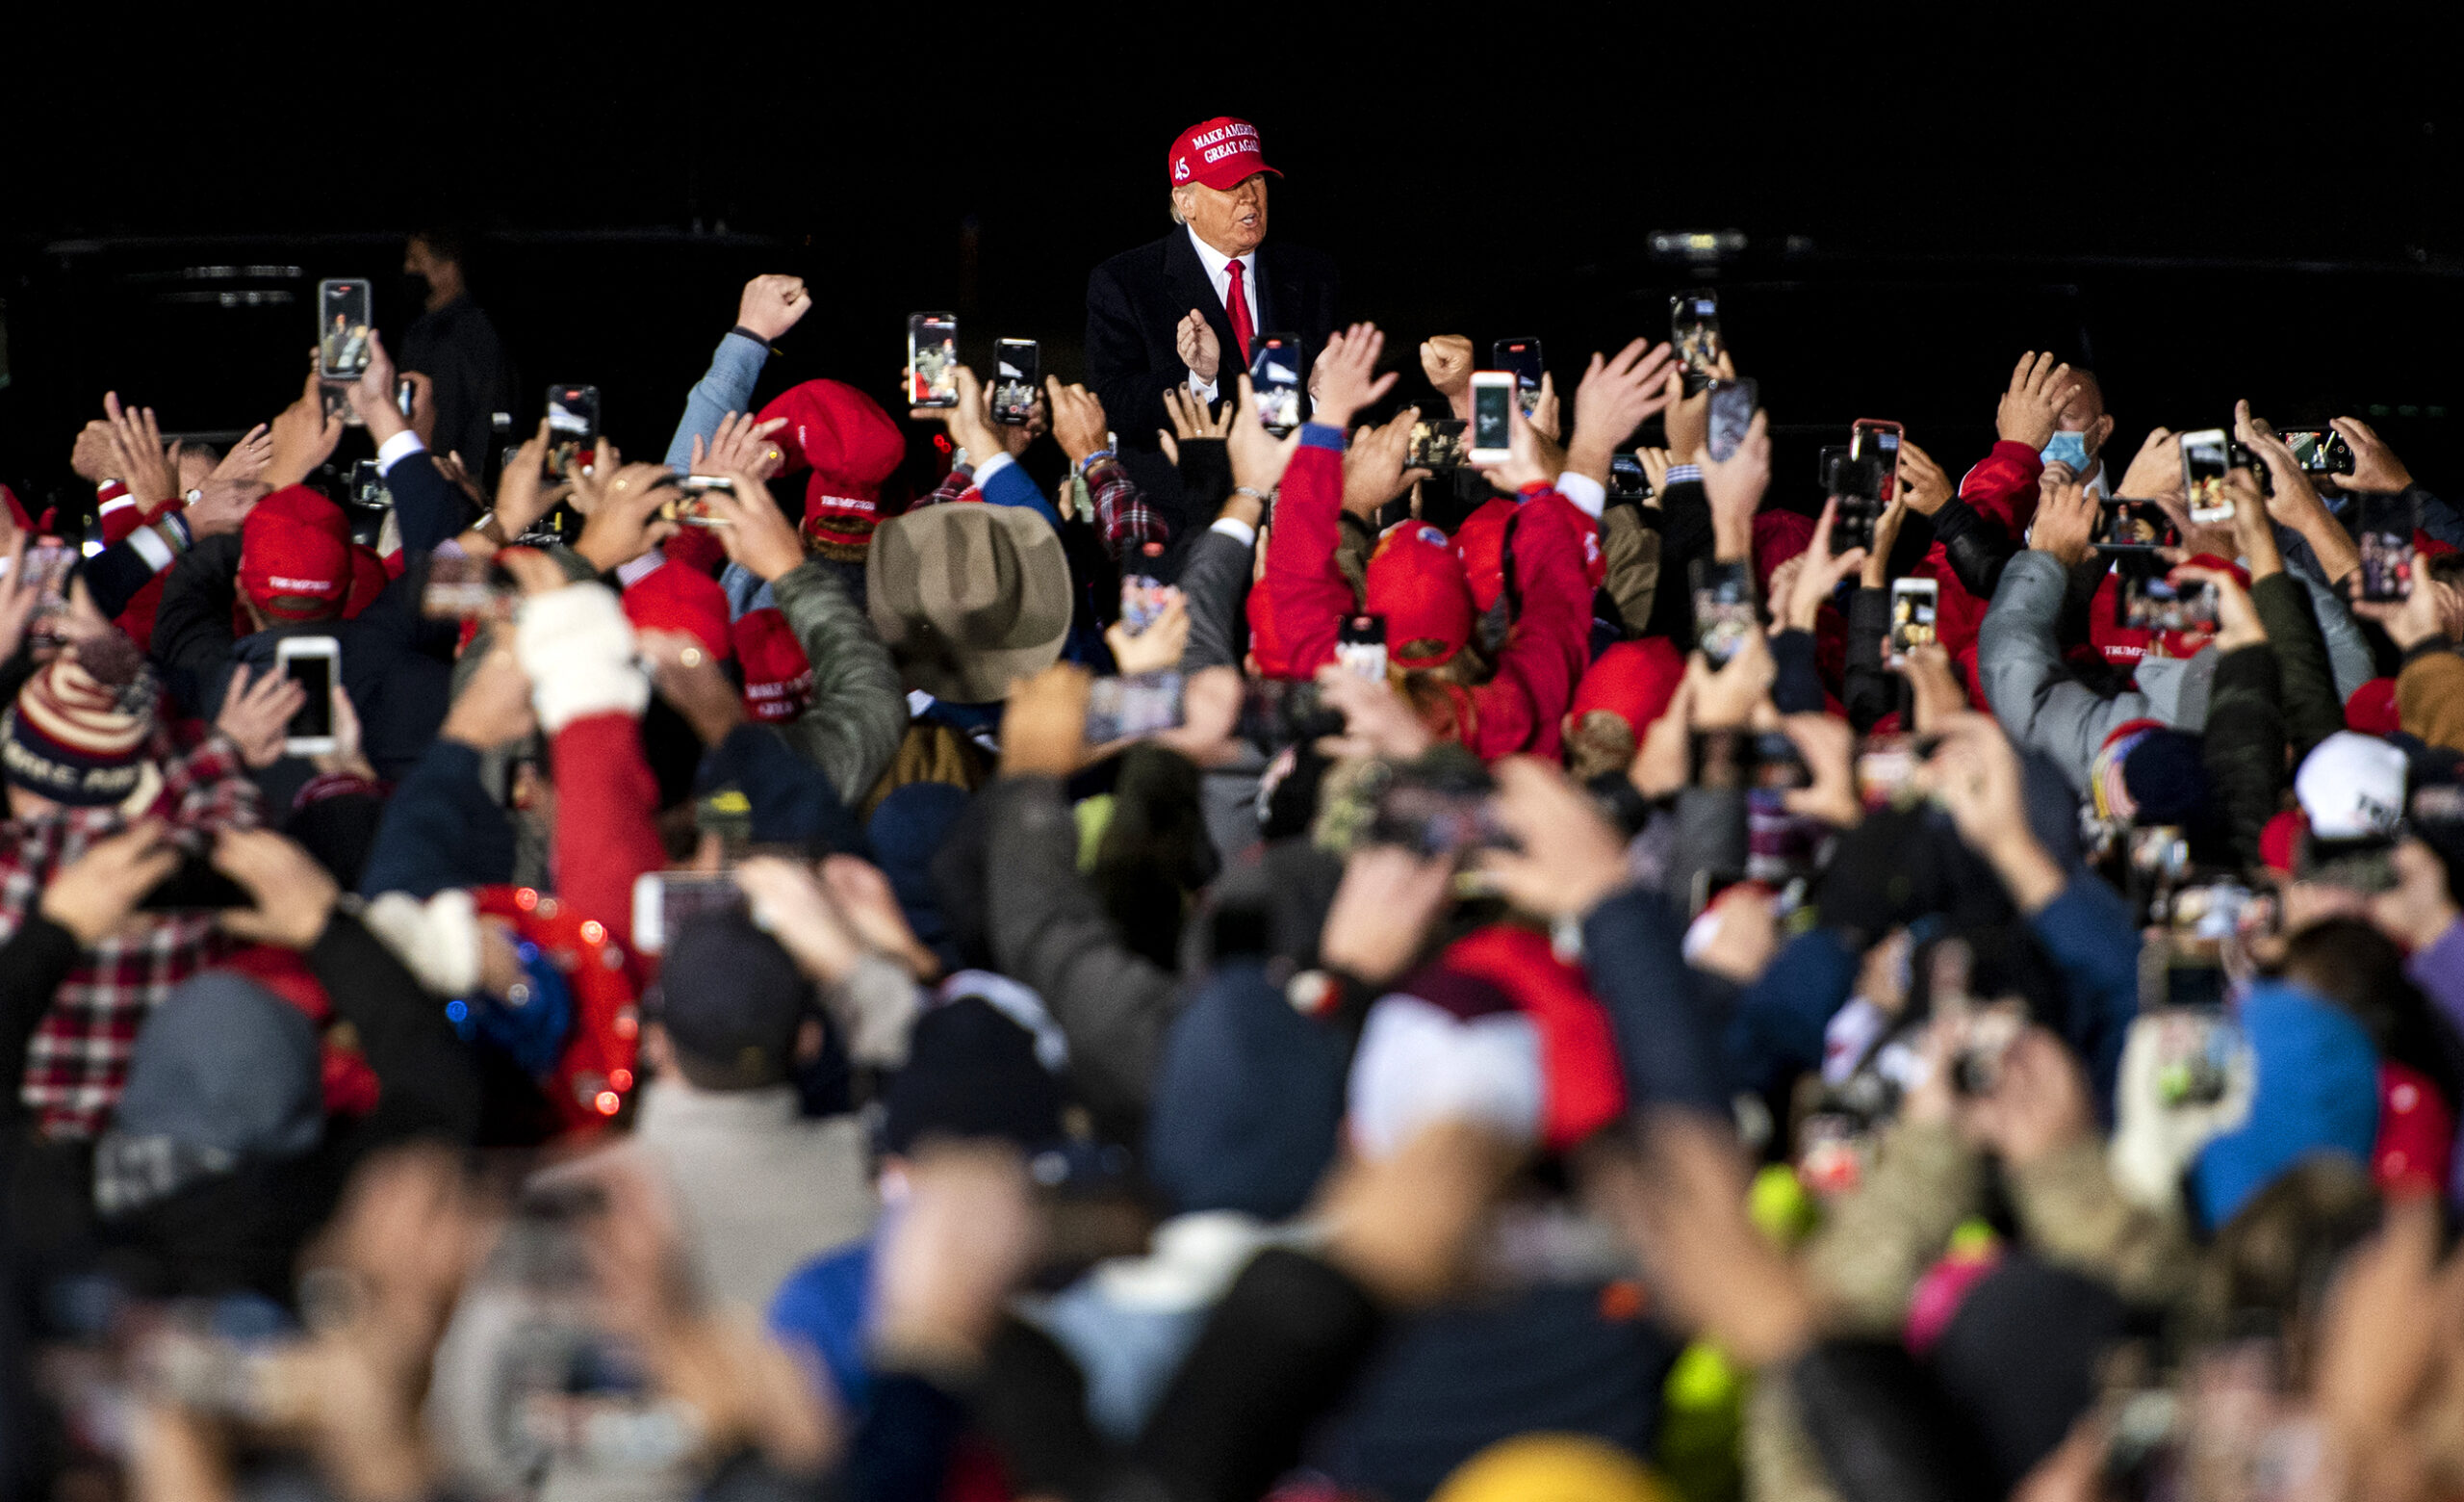 President Donald Trump wears a red hat as he approaches supporters who are gathered close together and raising their hands